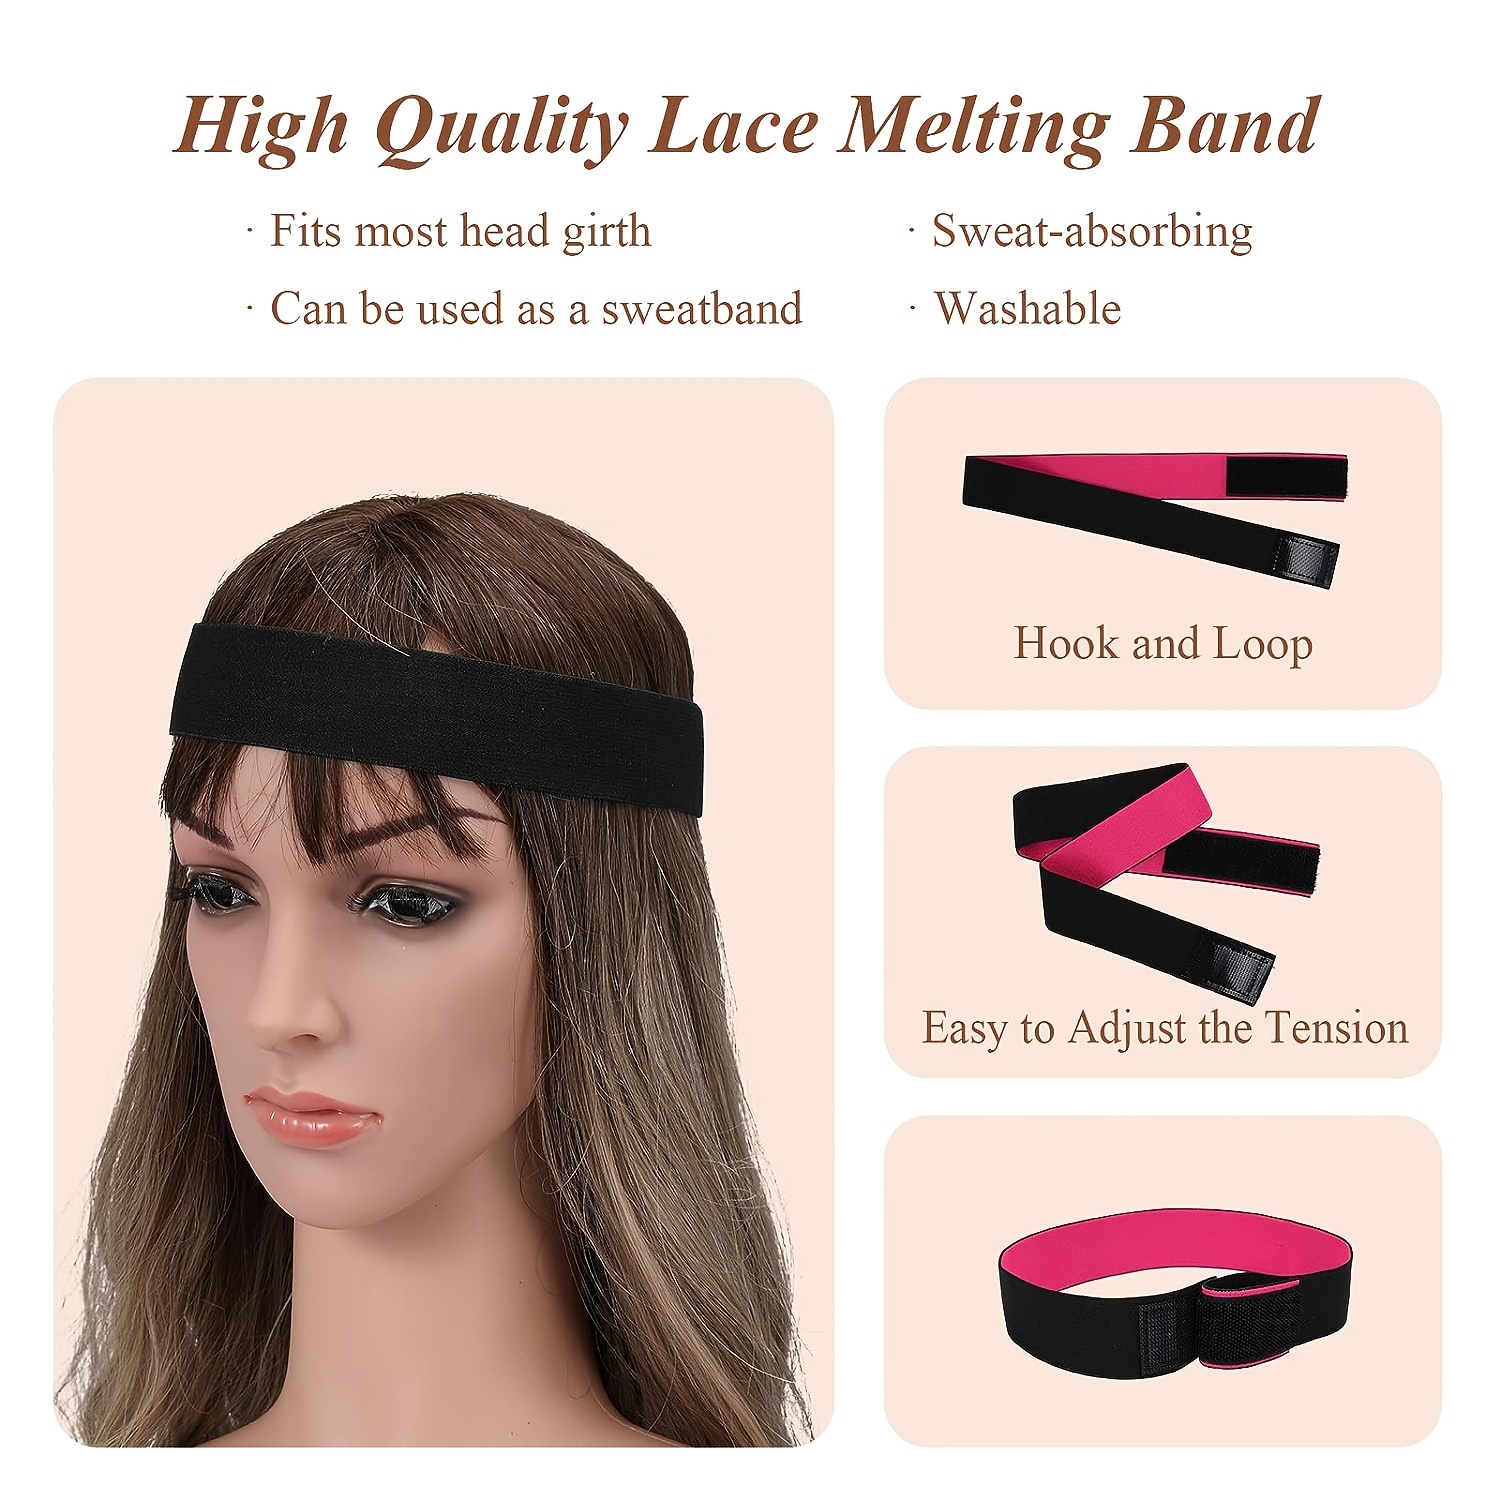 MTLEE 9 Pcs Wig Kit for Lace Front for Beginners Elastic Band for Wigs Non  Slip Edge Laying Scarf with Eyebrow Trimmer Edge Brushes Mini Scissors for